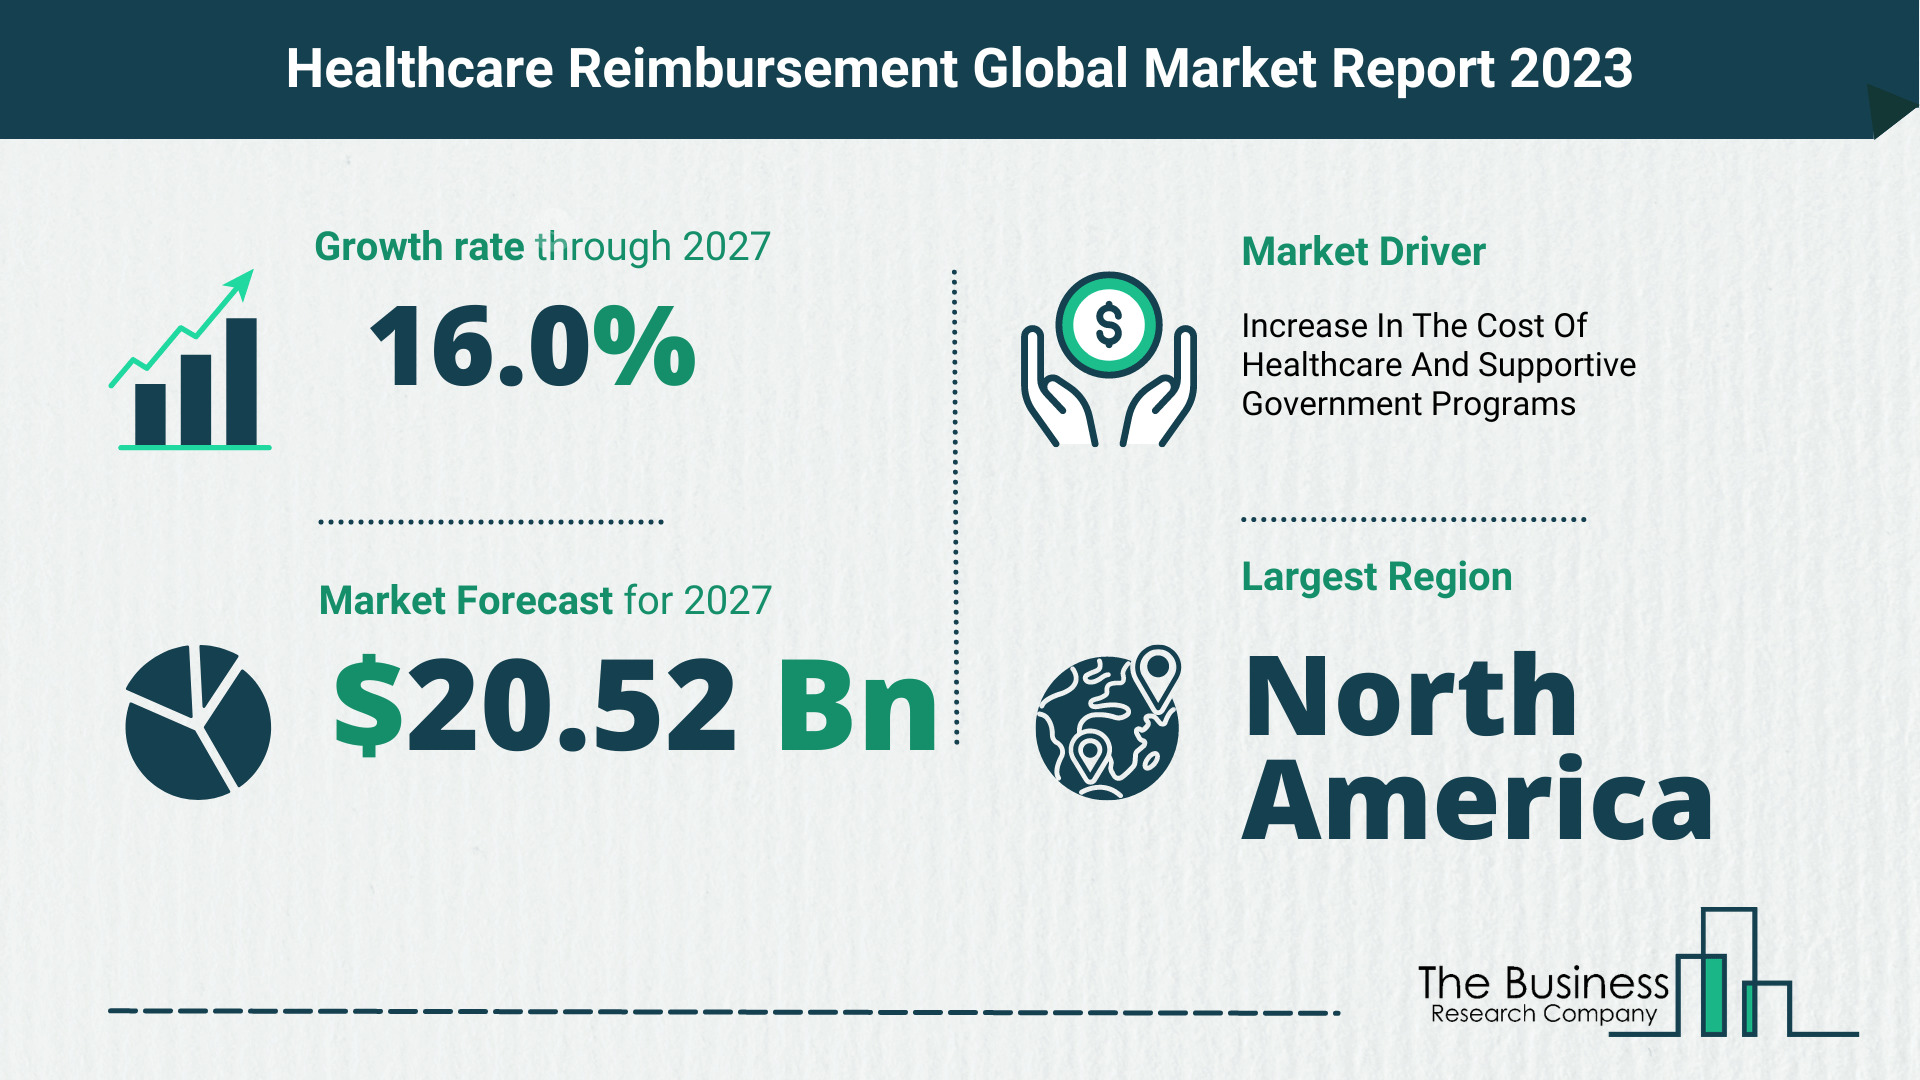 How Will The Healthcare Reimbursement Market Globally Expand In 2023?